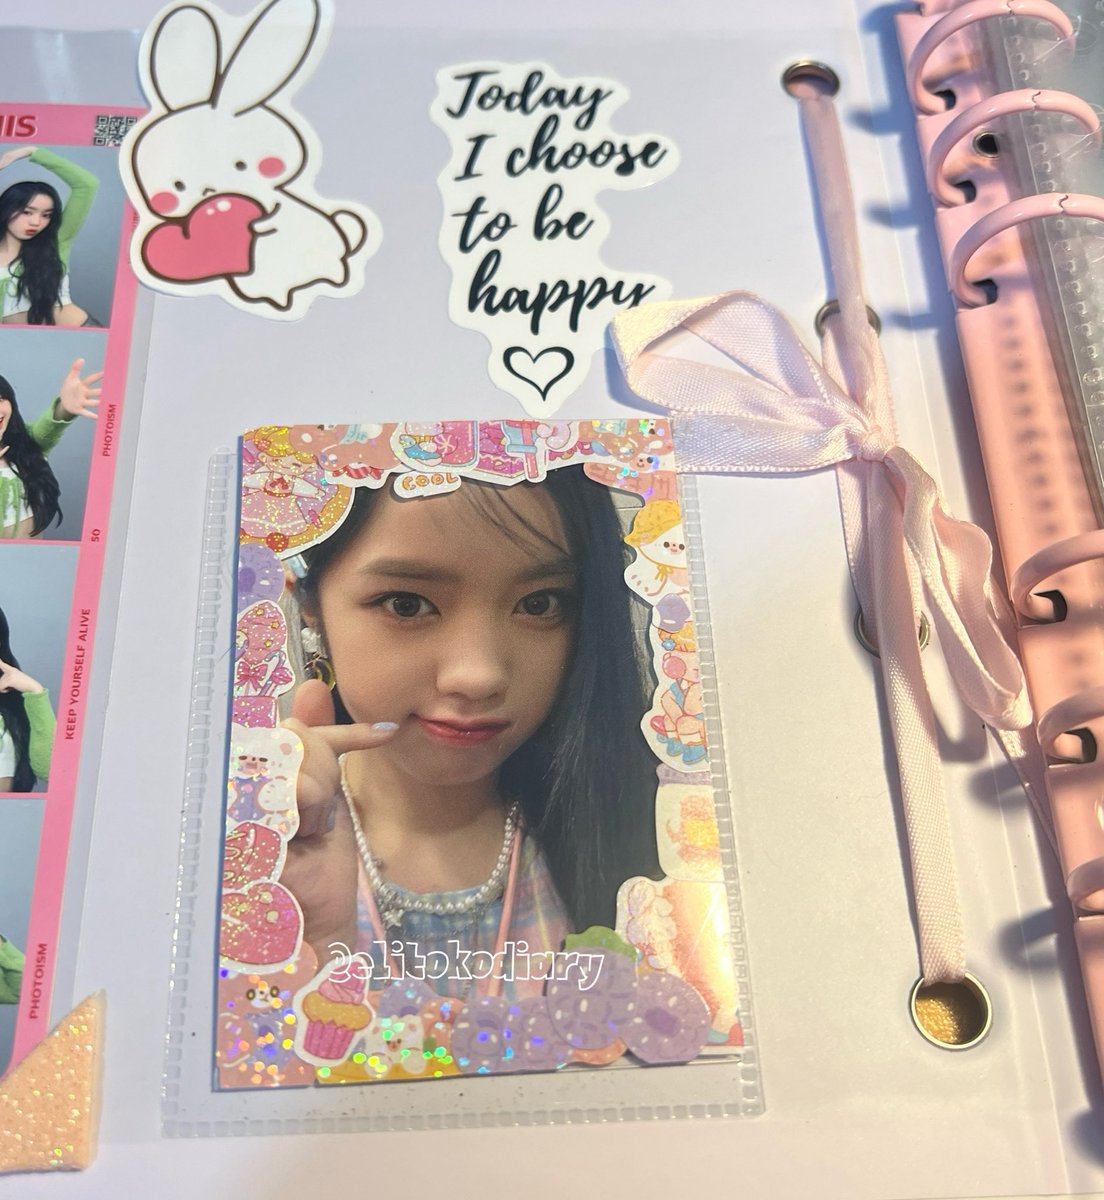 Recieved my first ever BCPC Photocard. #Elisia Week 1. So Cute.

Recommended Seller @zhangcart for being acommodating and responsive ❤️❤️ Thank you so much!